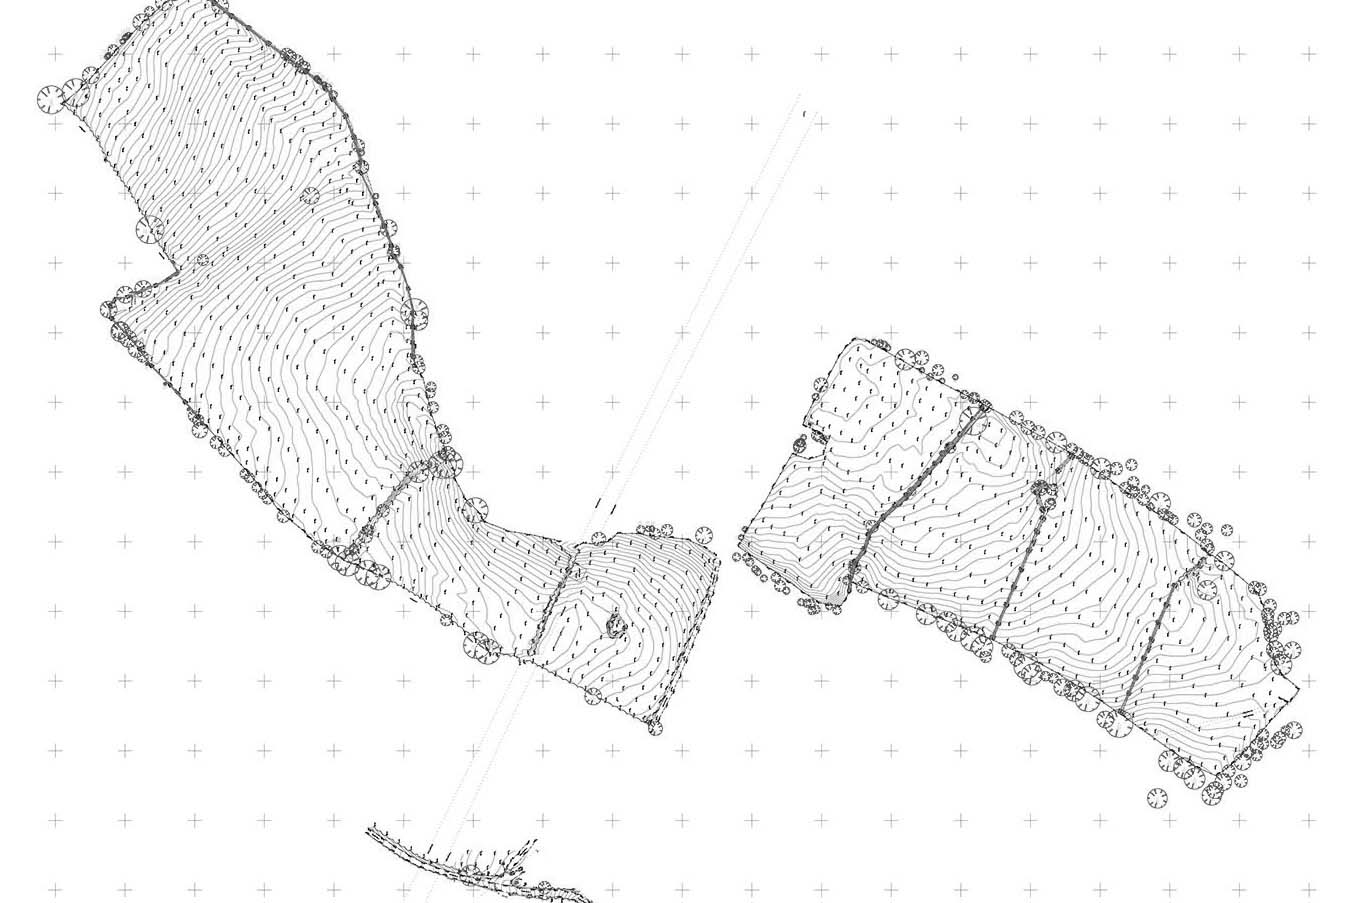 topographical survey plan of solar site